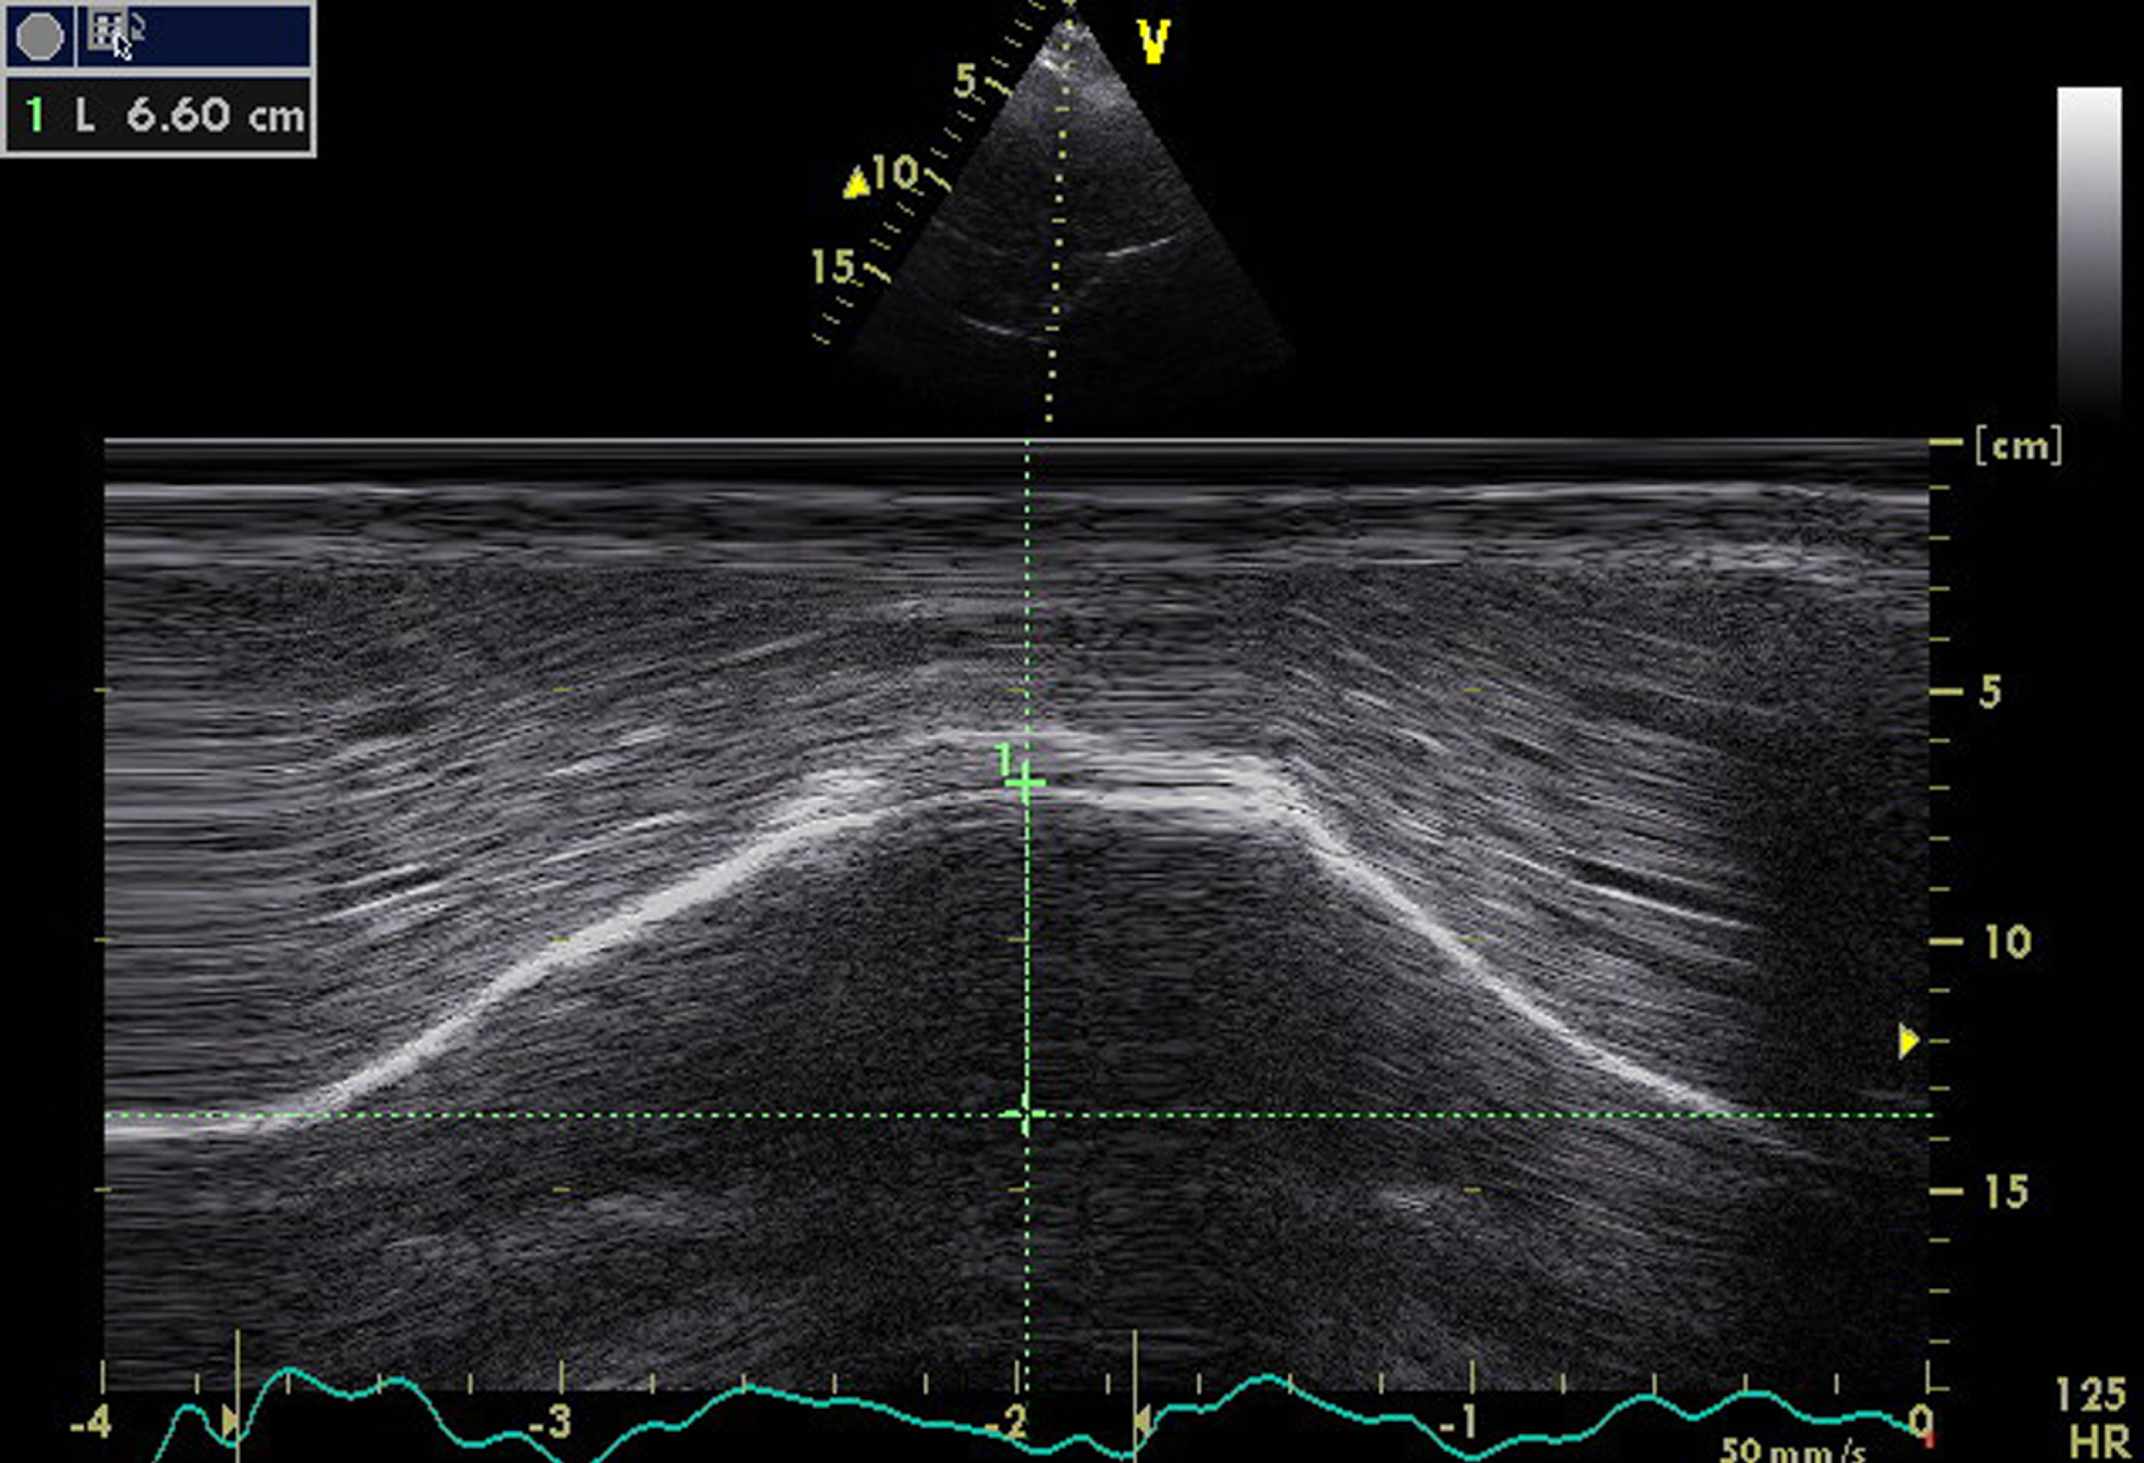 Diaphragm M mode ultrasound imaging from an anterior subcostal view for the measurement of the hemi diaphragm motion during inspiration. Note the normal right hemi-diaphragmatic excursion reaching 66 mm during deep inspiration.